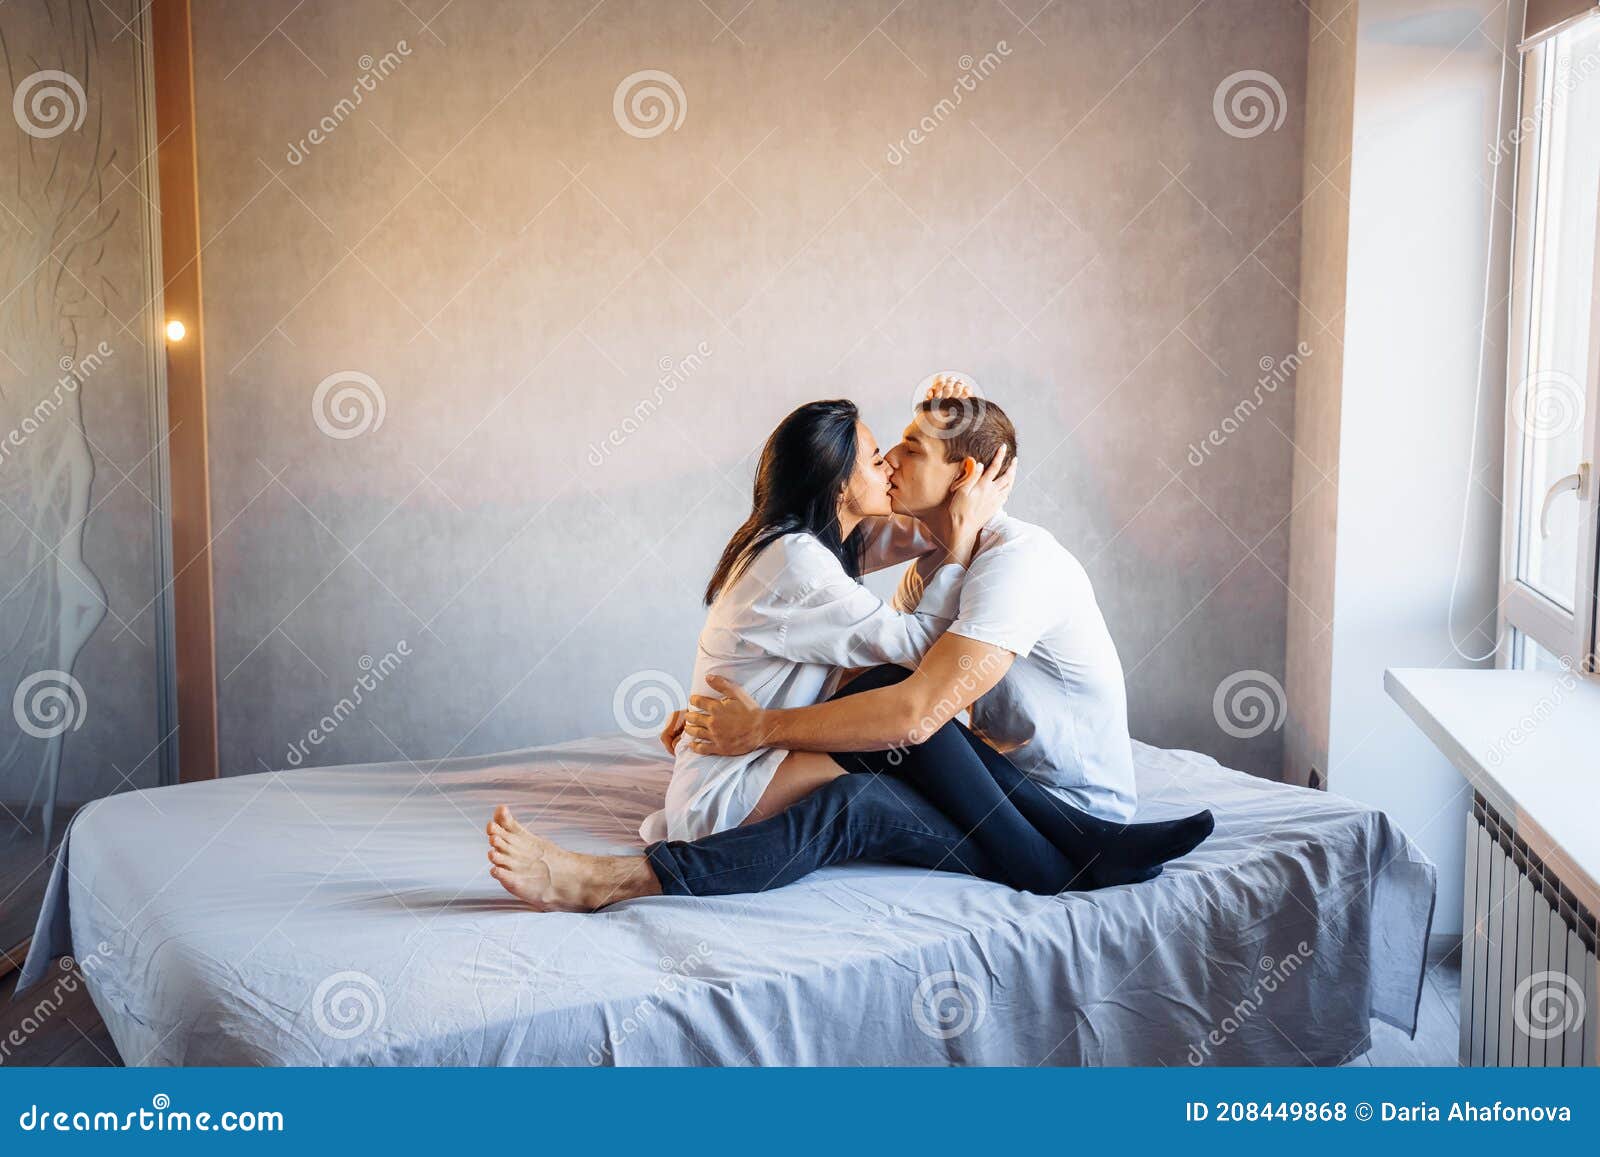 Attractive, Young Couple of Lovers Having Sex at Home in the Bed in Bright Room photo